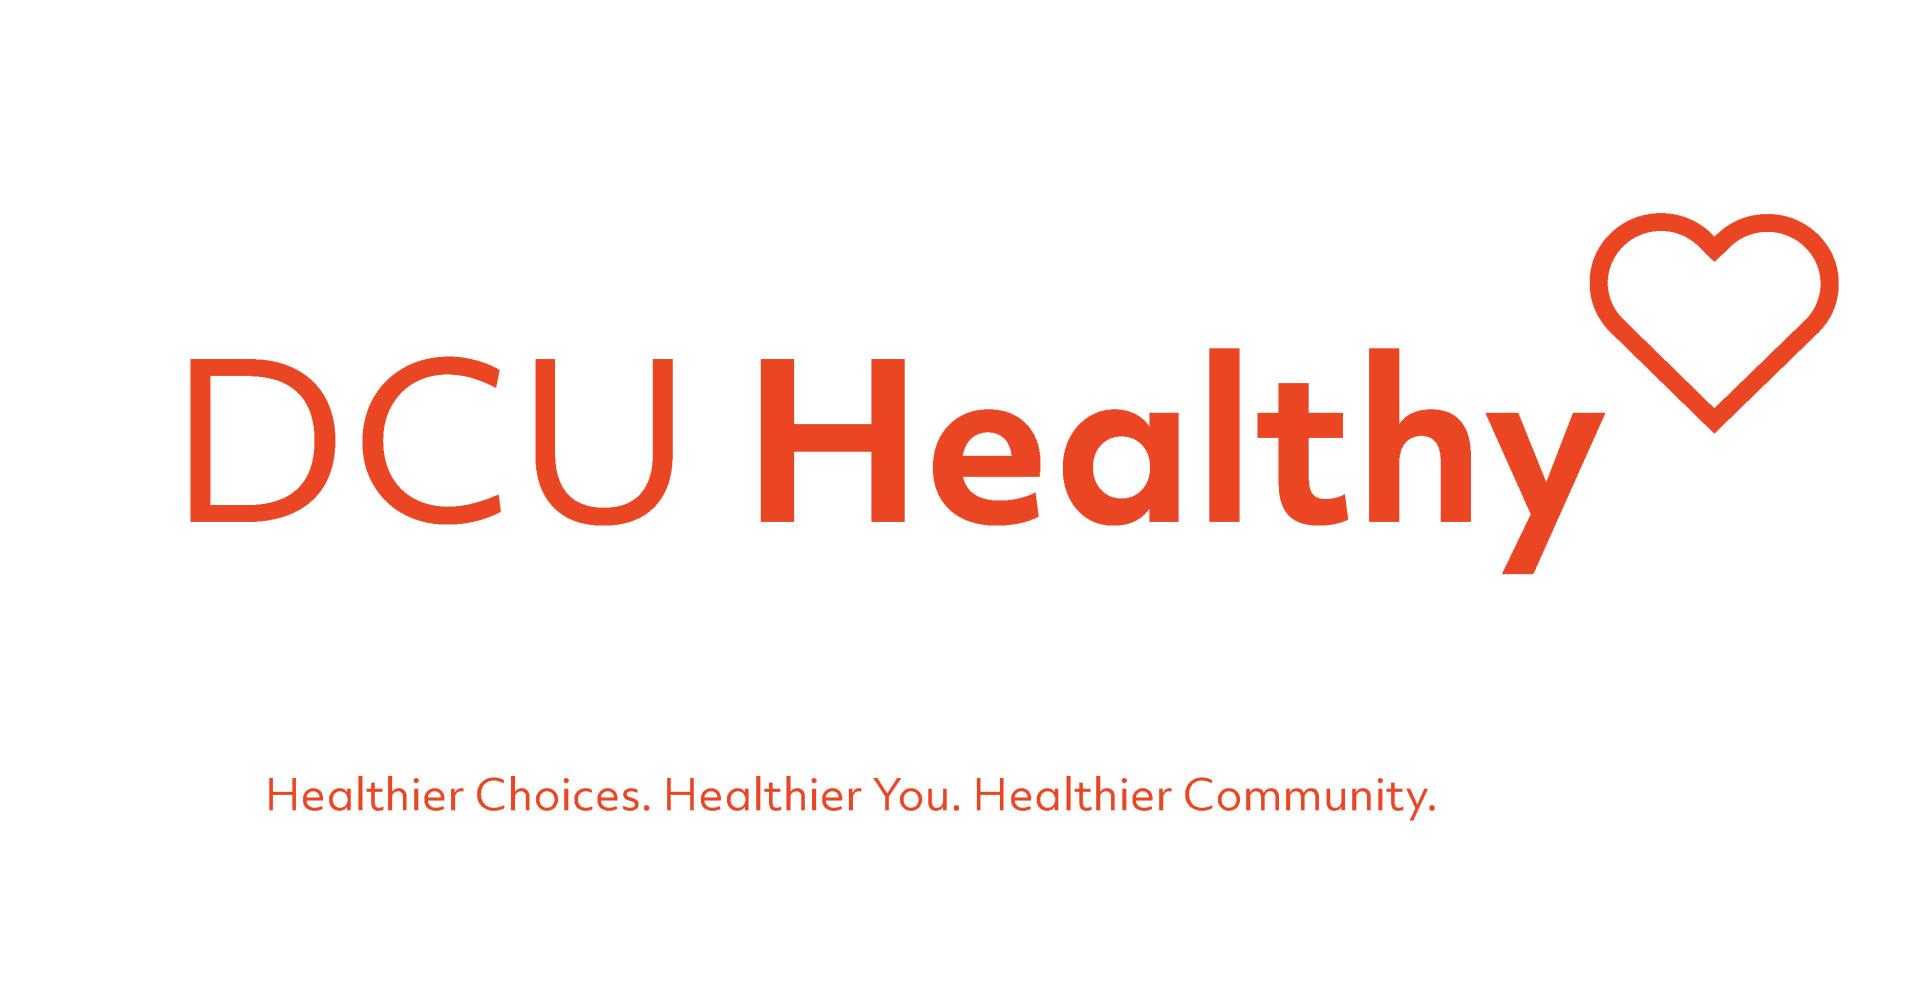 What is DCU Healthy?